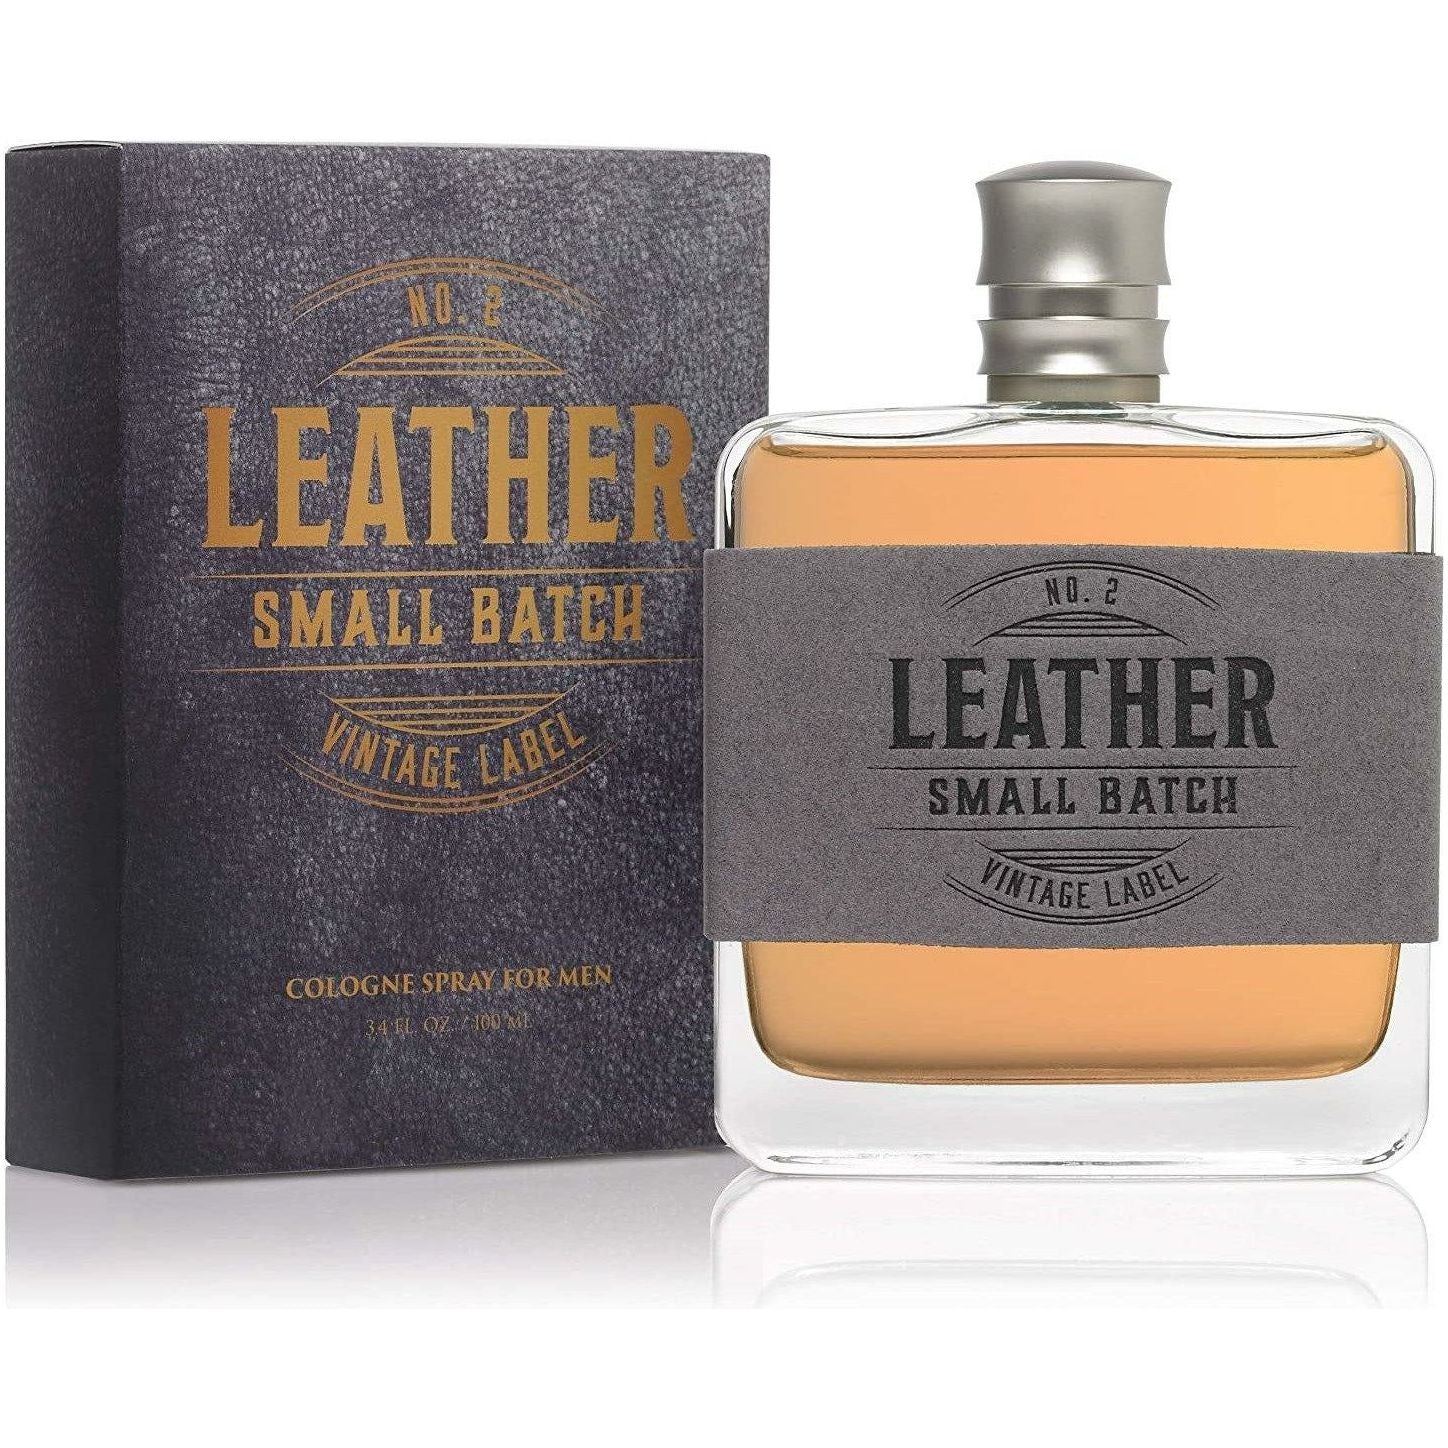 Leather No. 2 Small Batch Vintage Label  Cologne 3.4 oz - CWesternwear